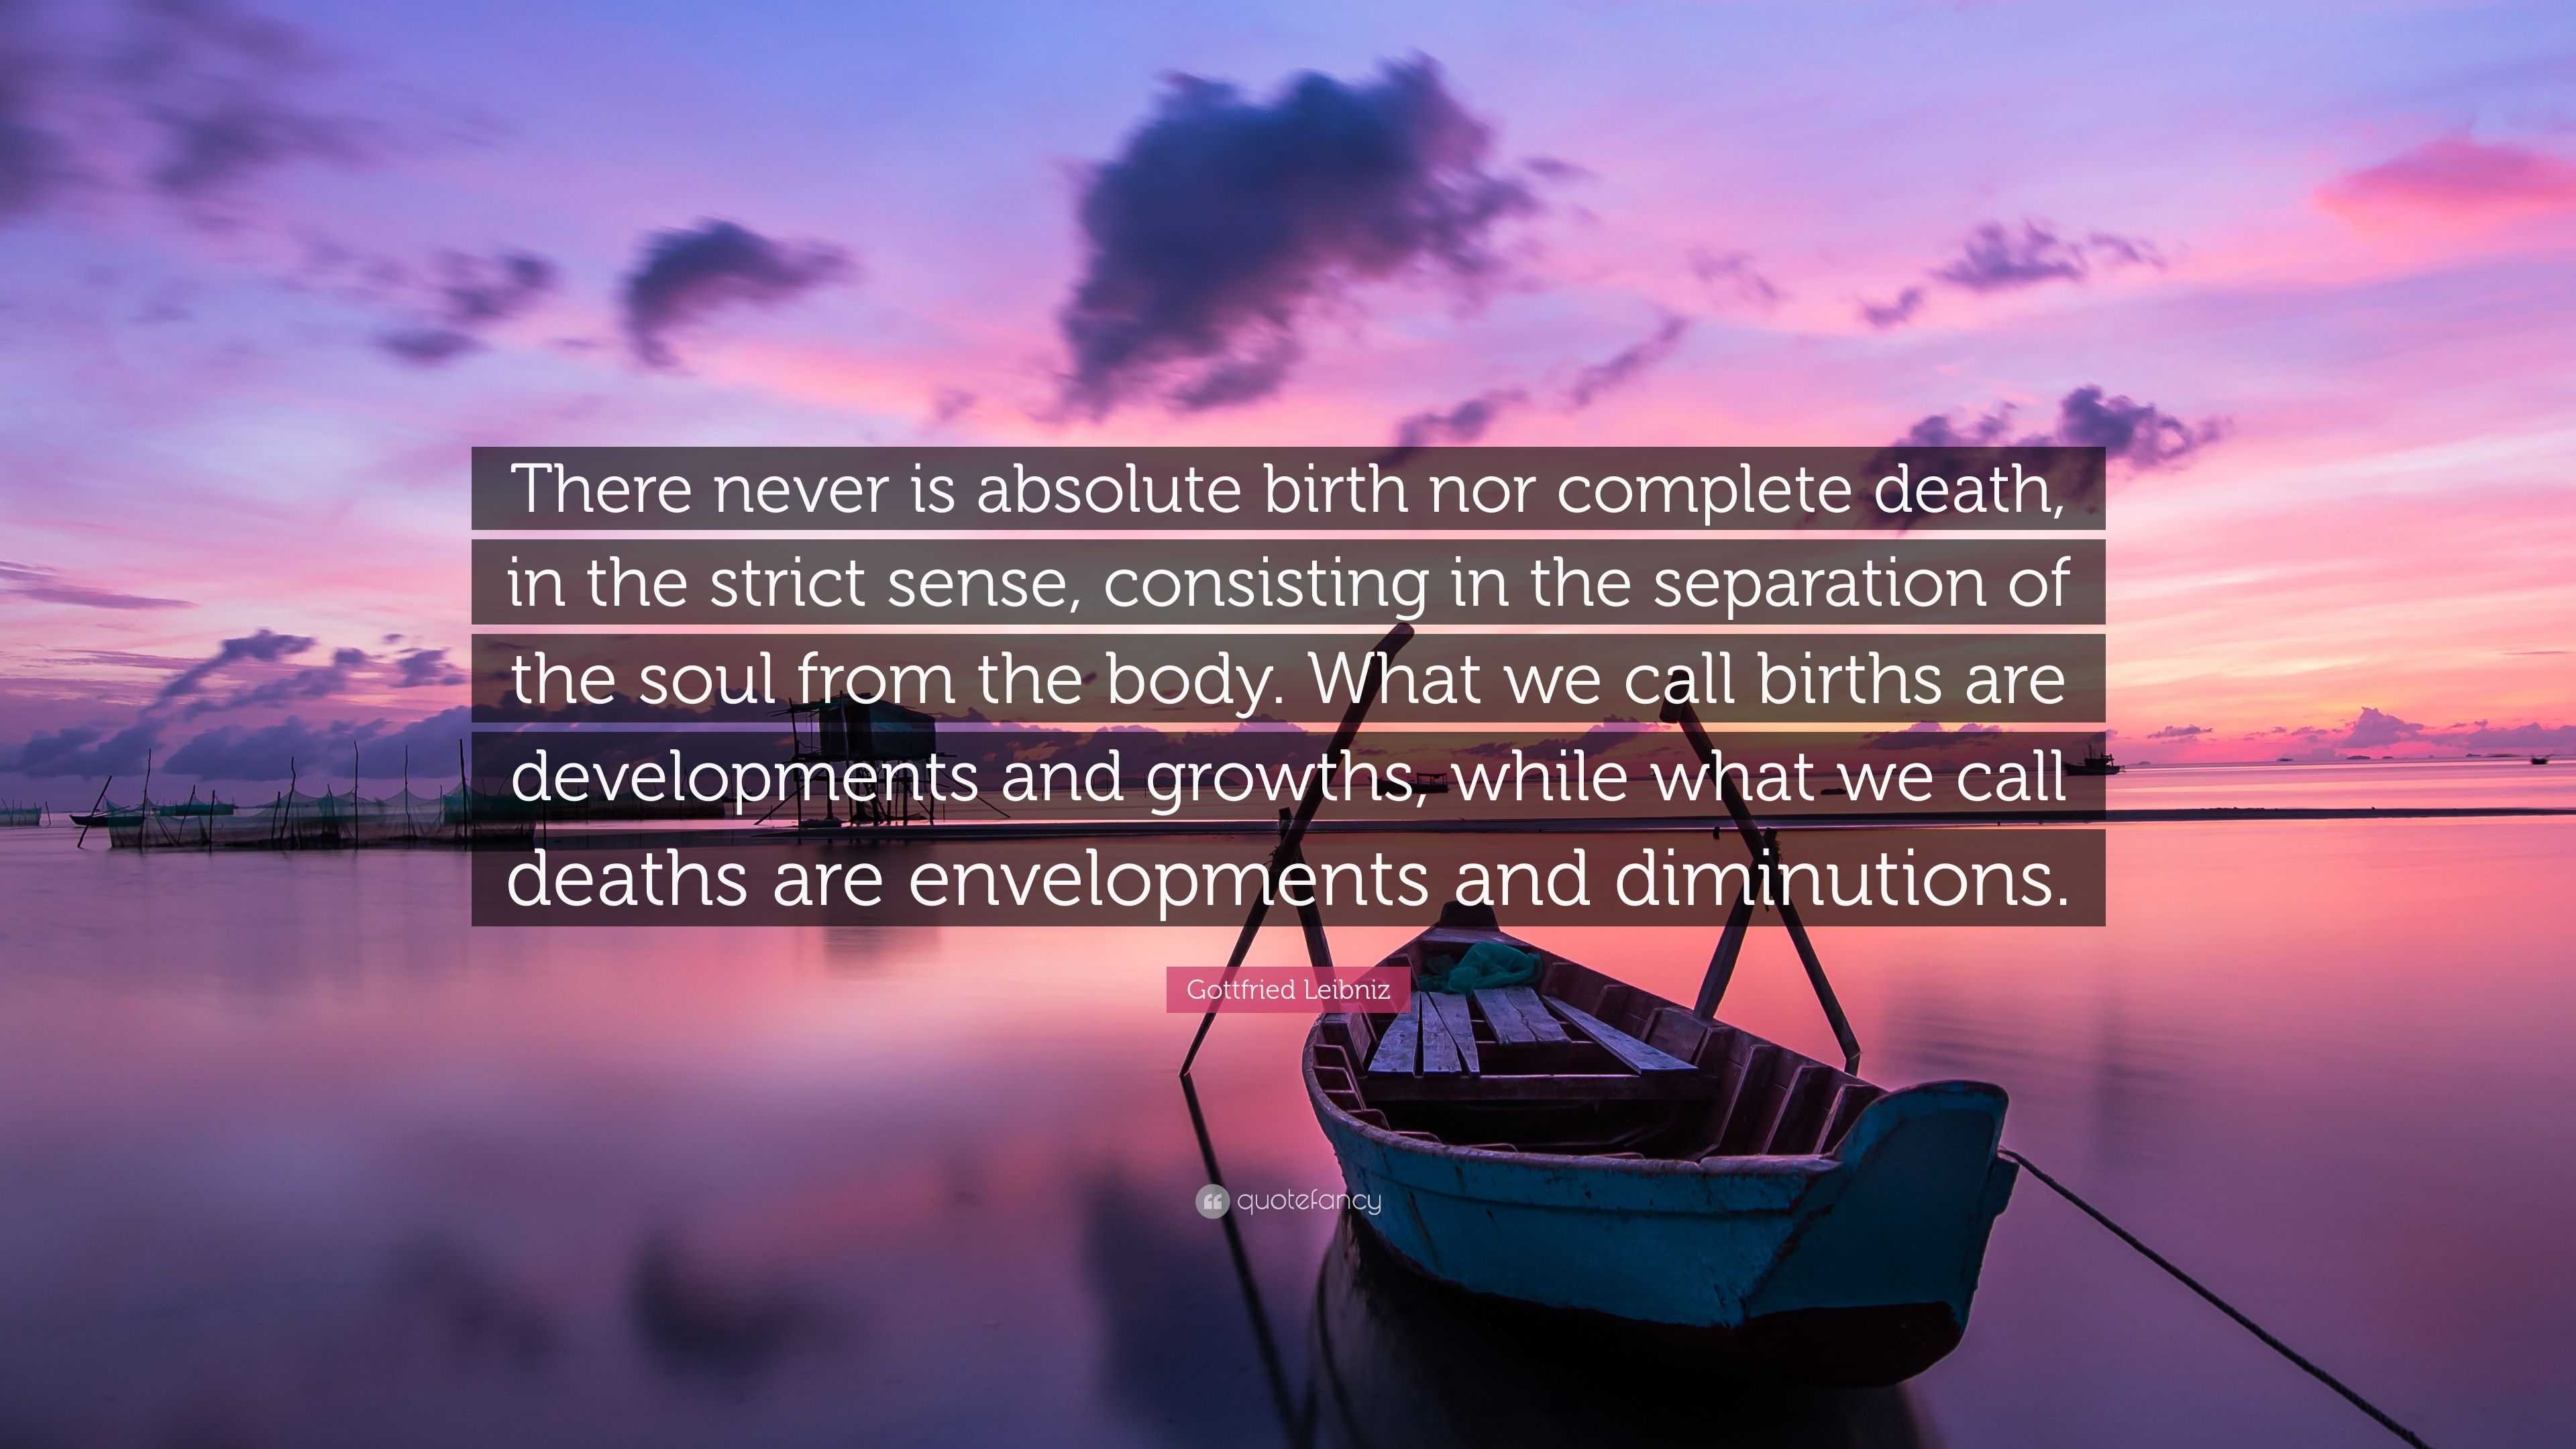 Gottfried Leibniz Quote: “There never is absolute birth nor complete ...